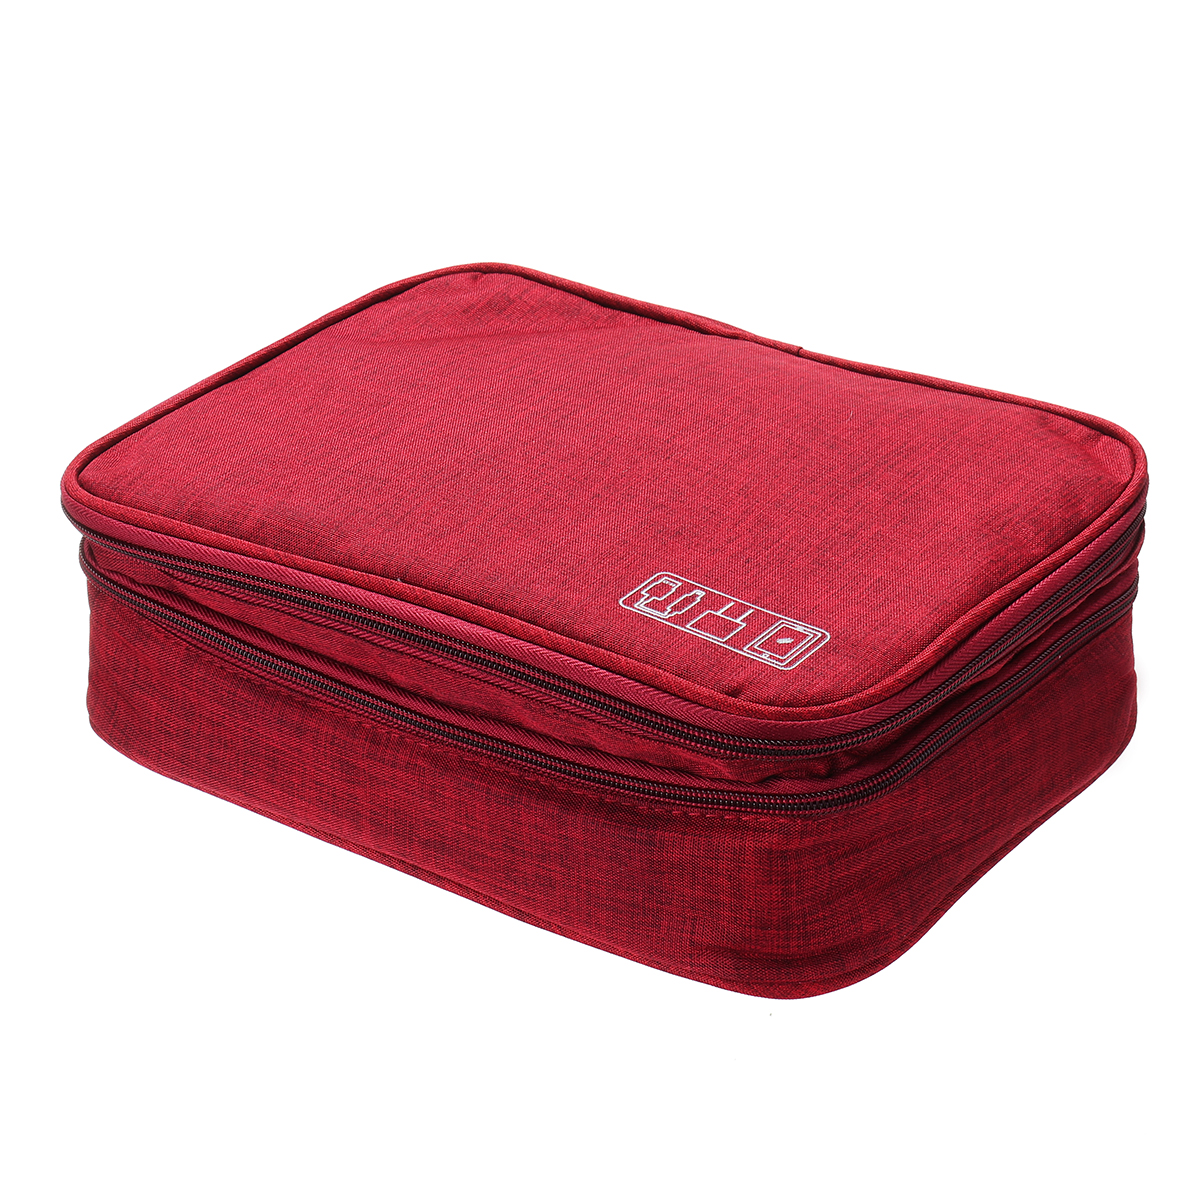 Find Data Cable Storage Bag Multifunctional Digital Devices Stationery Case Portable Travel Electronic Pouch Earbuds Earphone Organizer for Sale on Gipsybee.com with cryptocurrencies